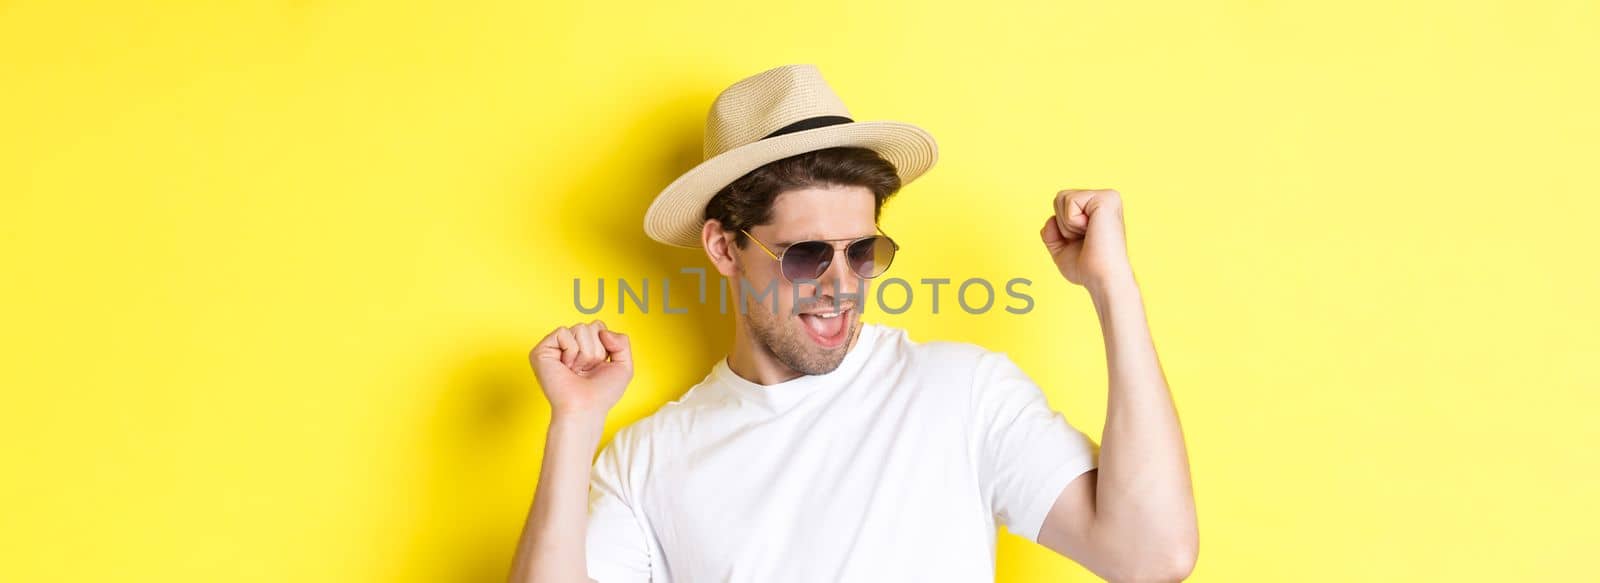 Concept of tourism and vacation. Close-up of man enjoying holidays on trip, dancing and pointing fingers sideways, wearing sunglasses with straw hat, yellow background.